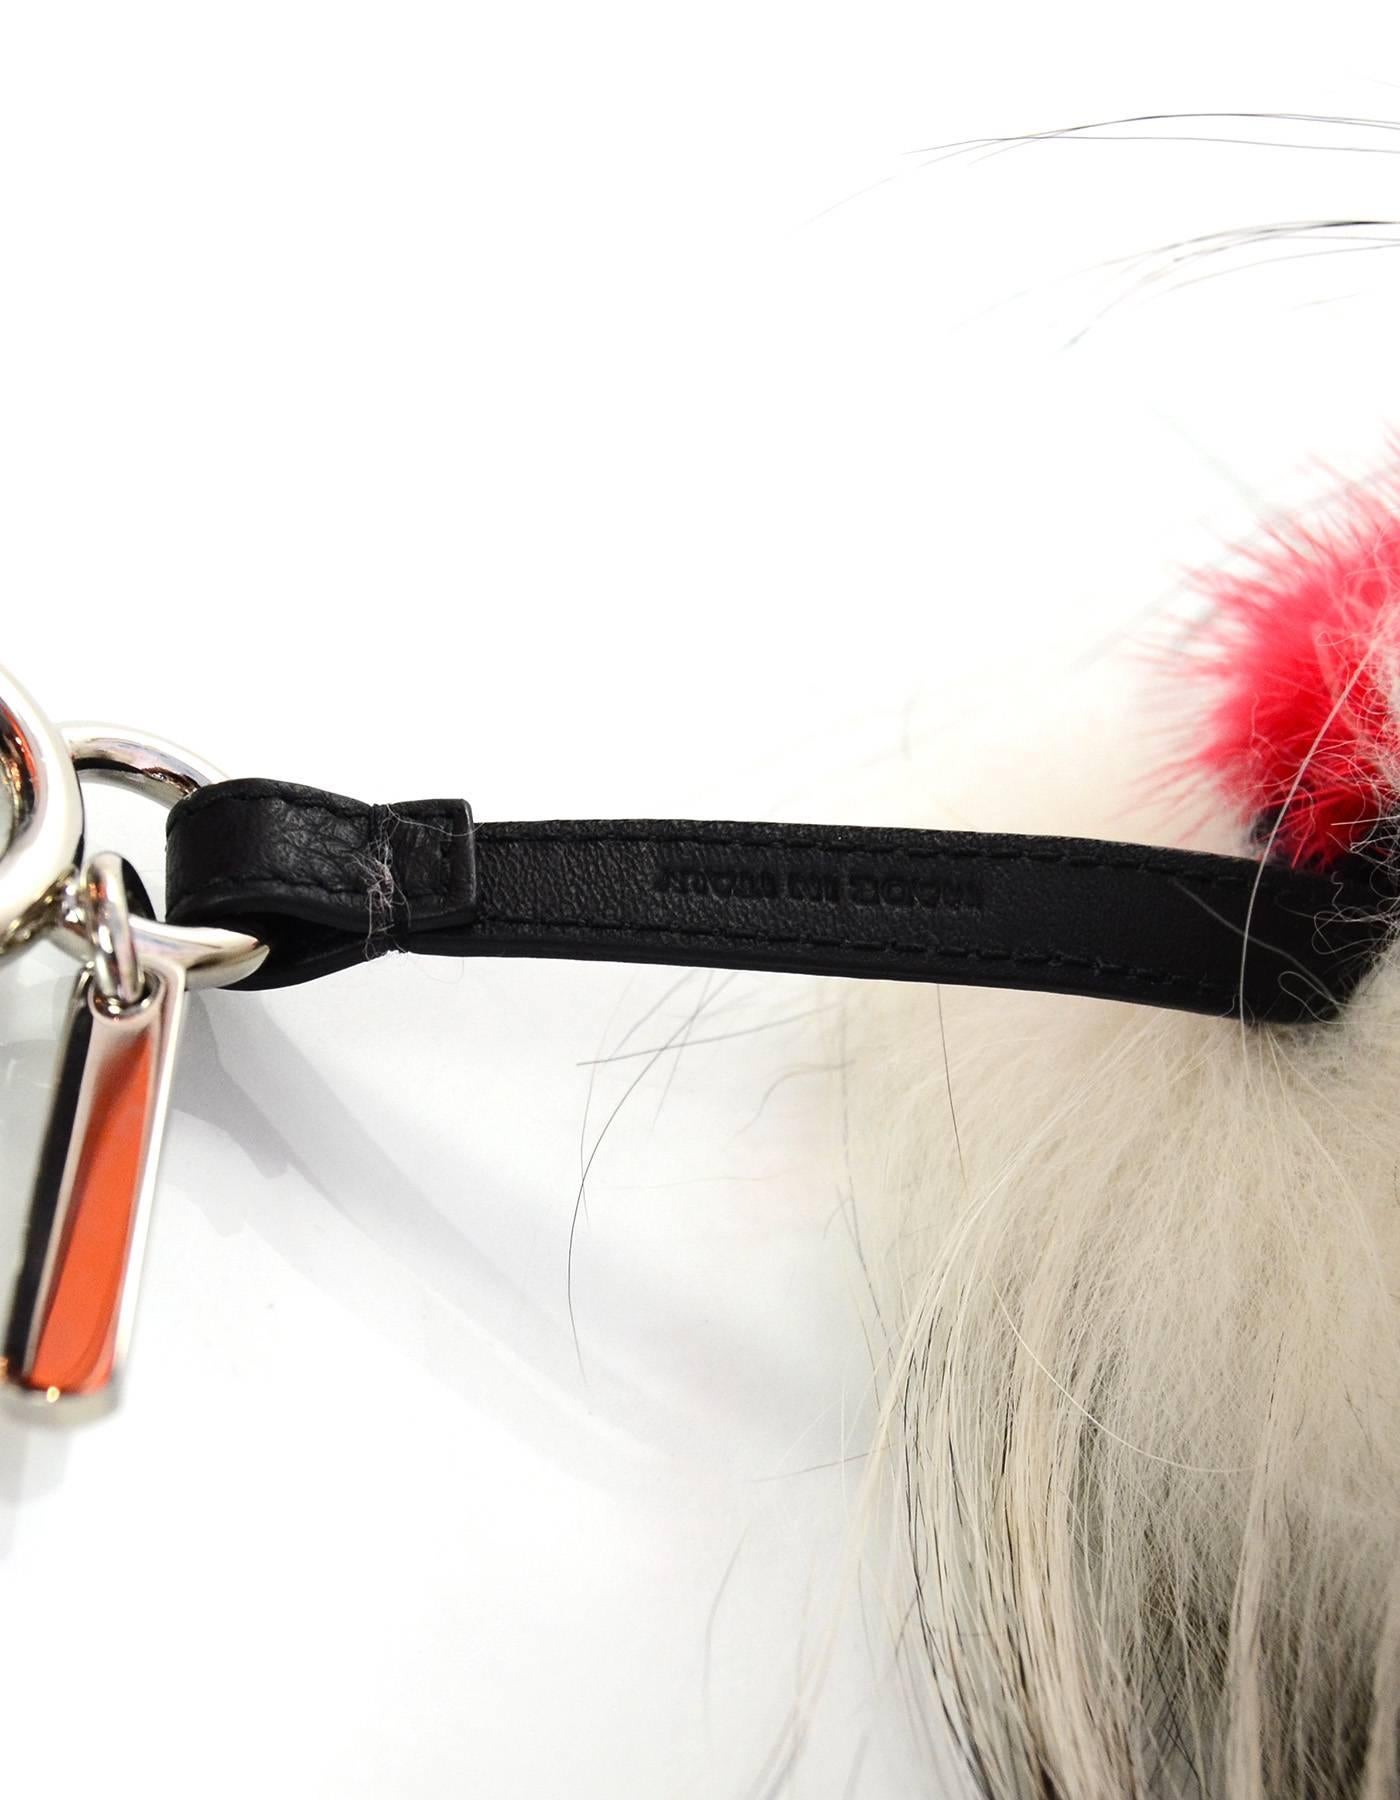 Fendi NEW Black White & Red Fur Archy Bag Bug Charm

Made In: Italy
Year of Production: 2015
Color: White, black and red
Hardware: Silvertone
Materials: Fox, mink, rabbit fur
Closure/Opening: Jump ring push lever
Retail Price: $800 + tax
Overall